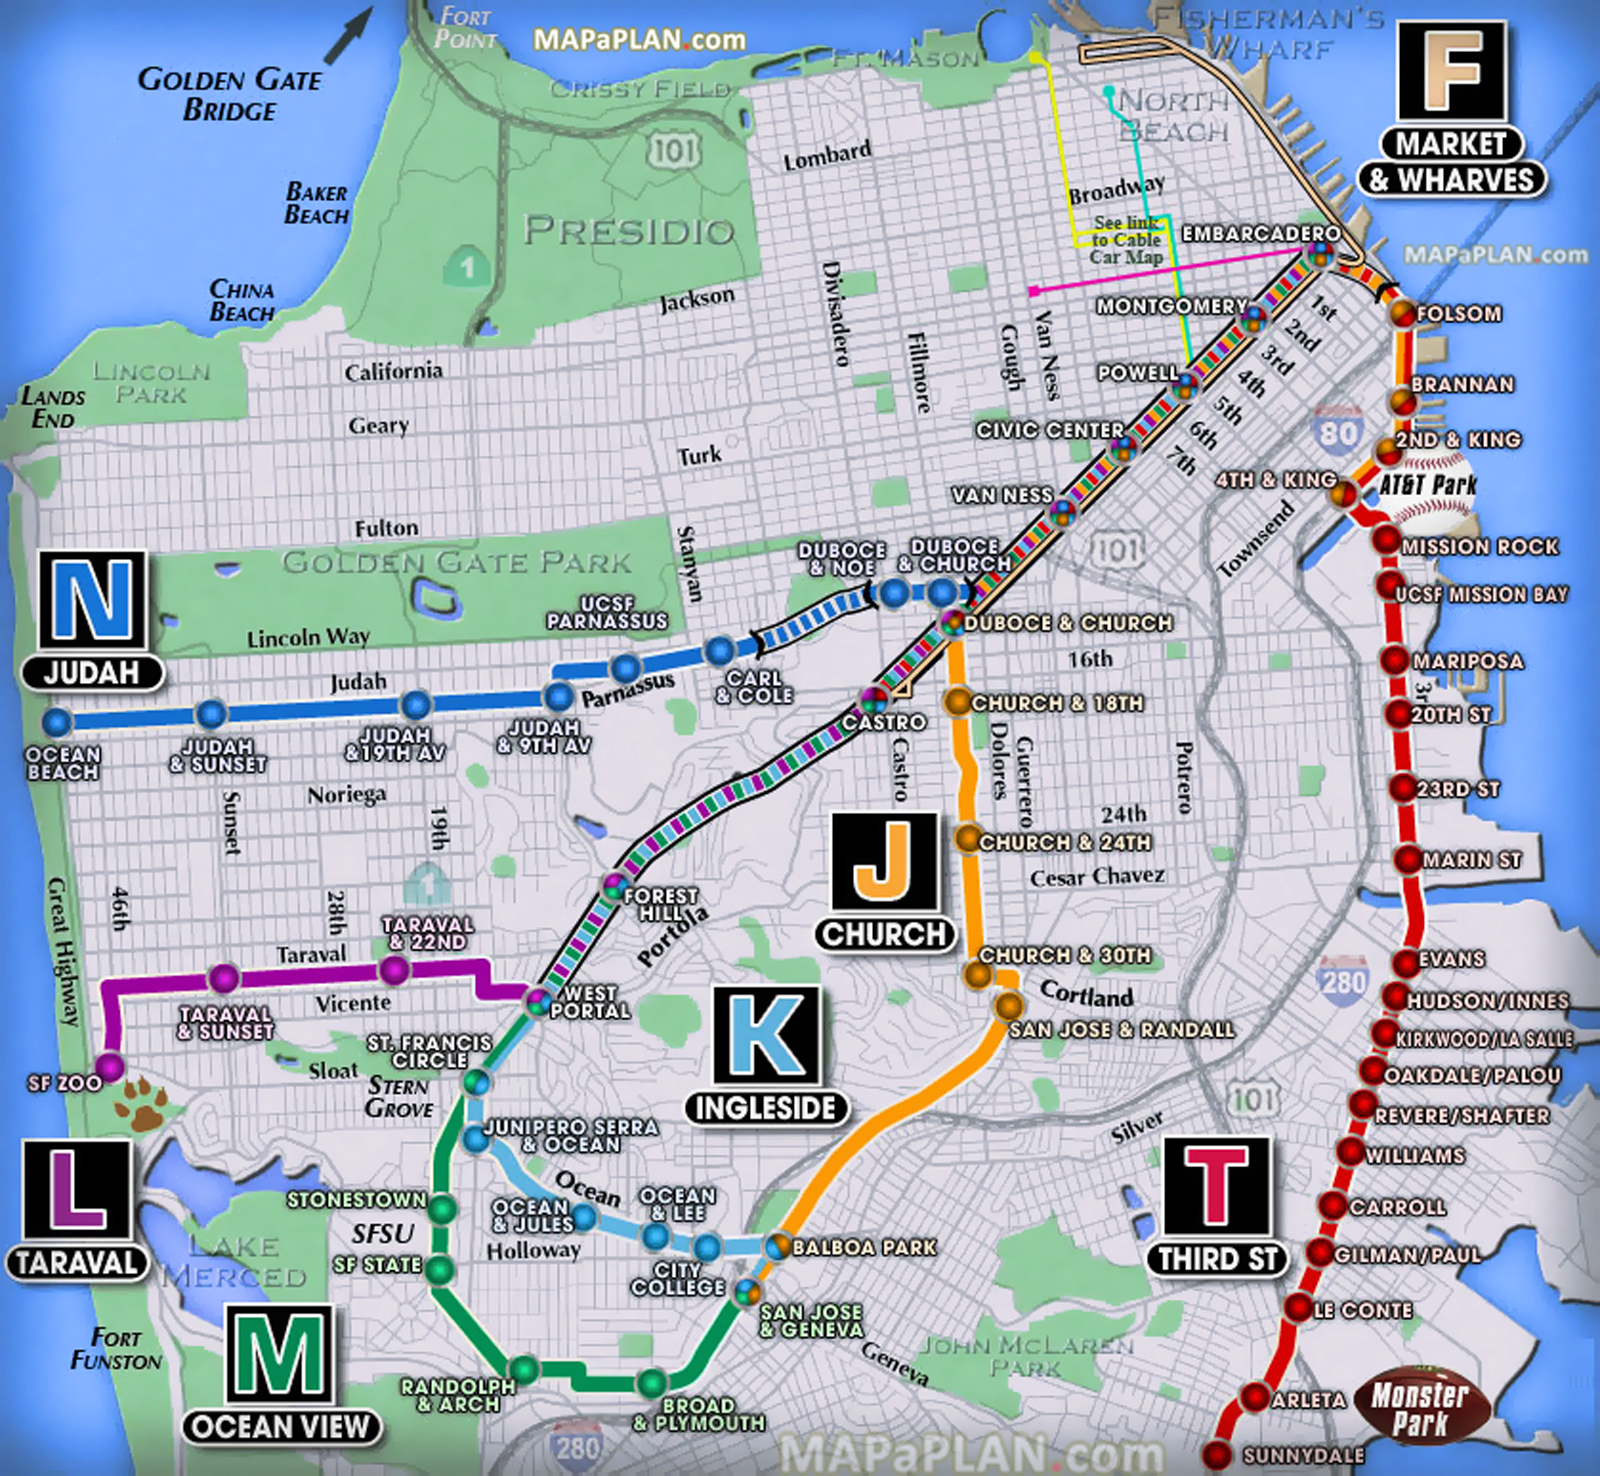 muni metro subway underground tube stations directions embarcadero powell civic center San Francisco top tourist attractions map